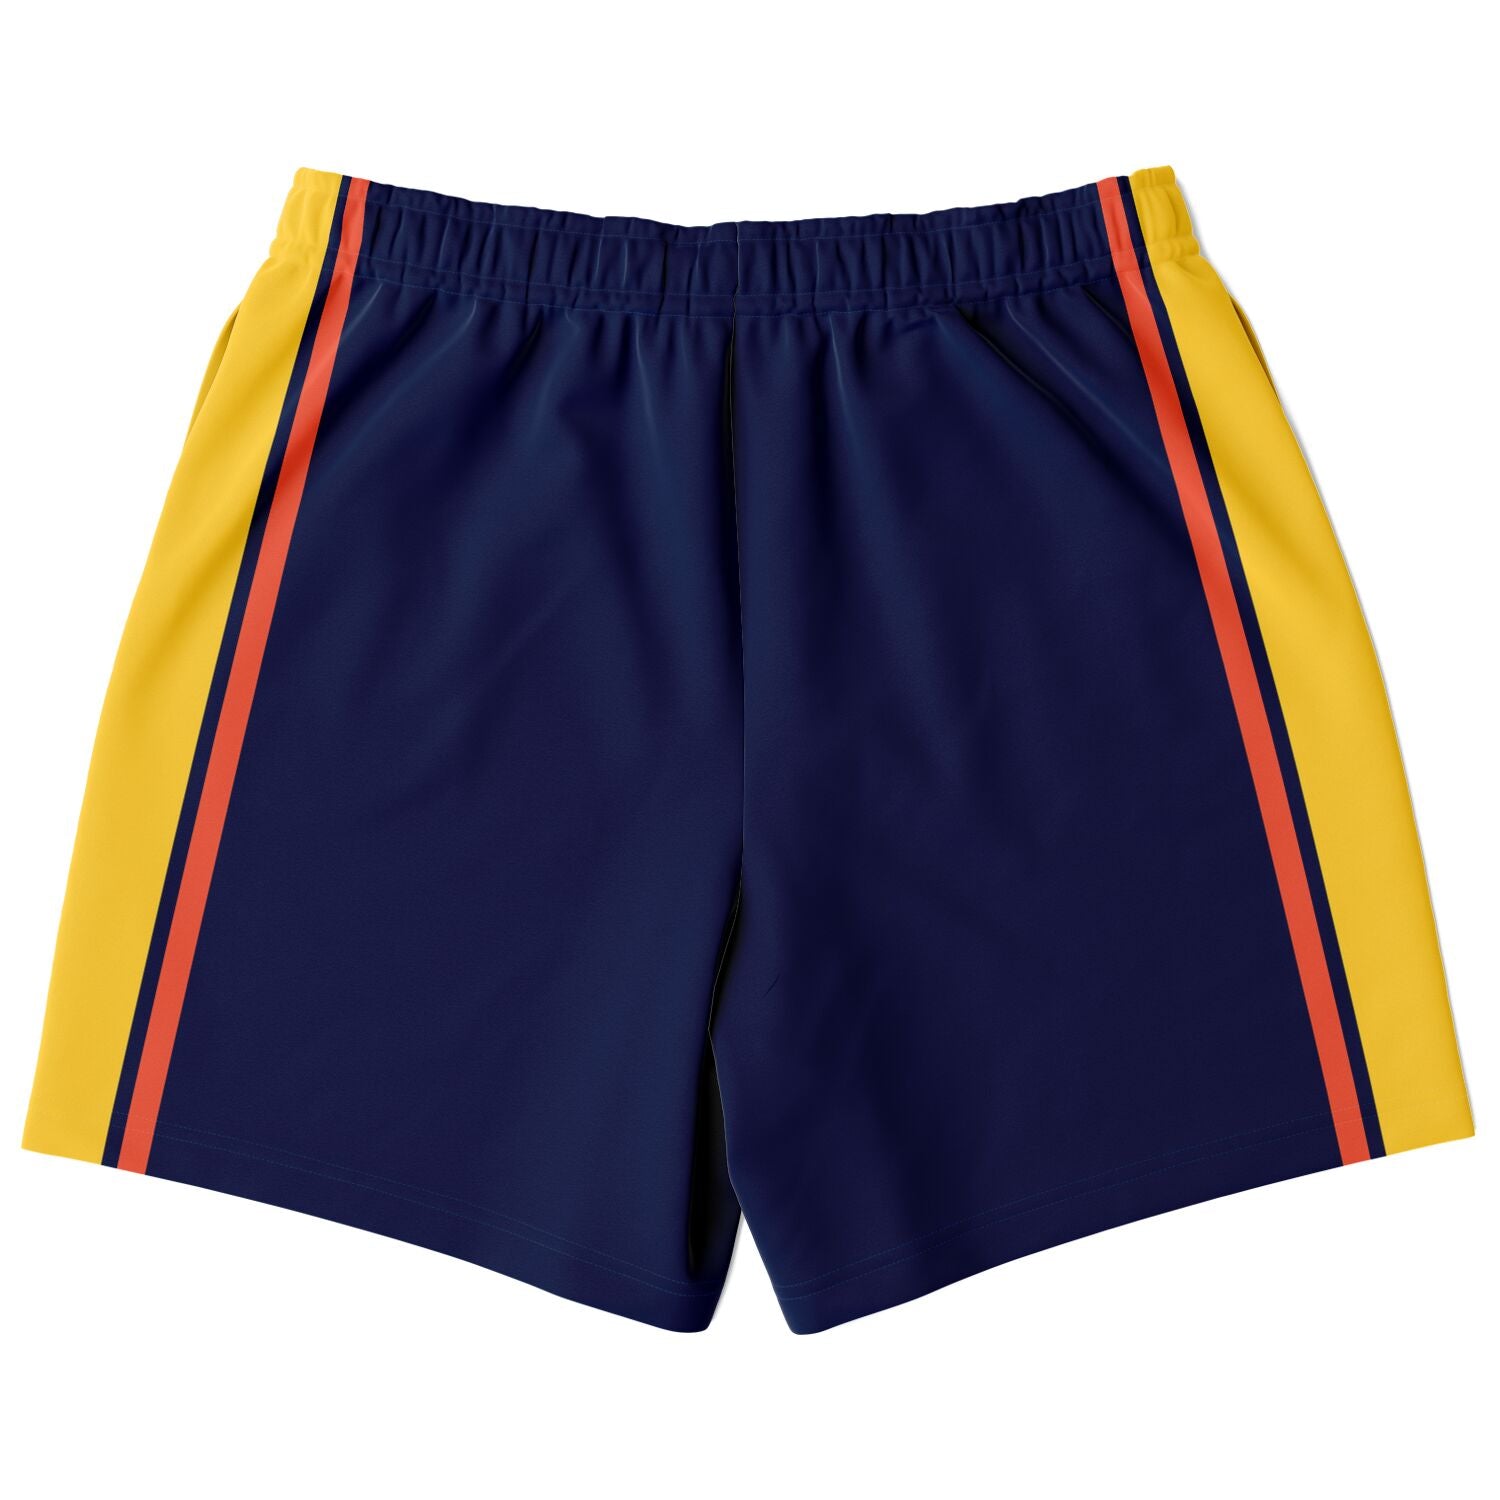 Short-Klay-Thompson-Golden-State-Warriors-Dearbball-clothes-brand-france